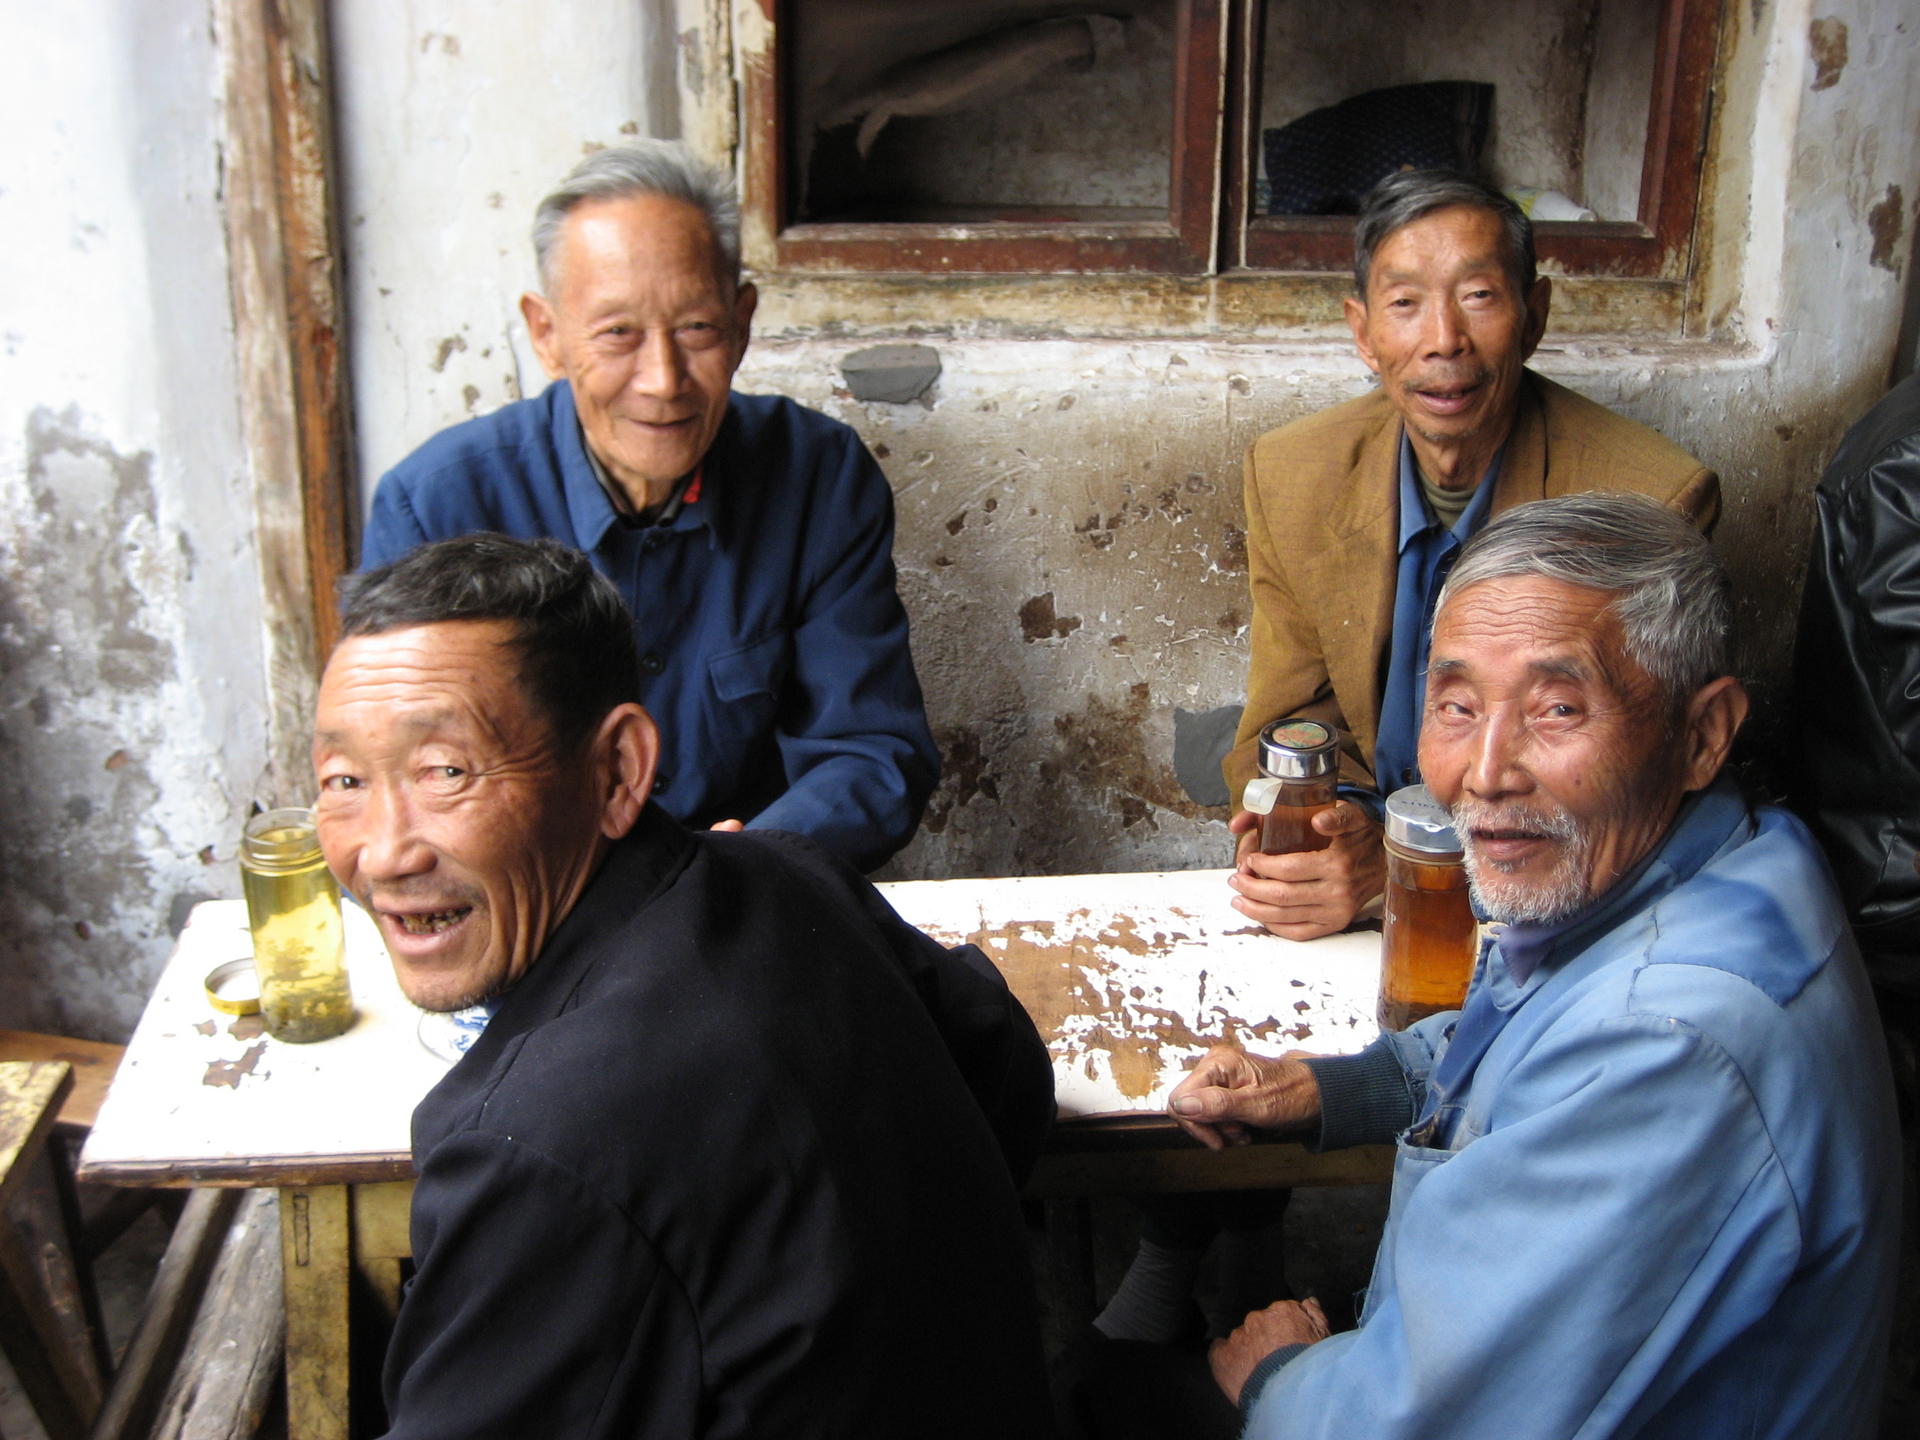 Villagers in Sichuan province react to seeing a laowai. Photo: Cecilie Gamst Berg